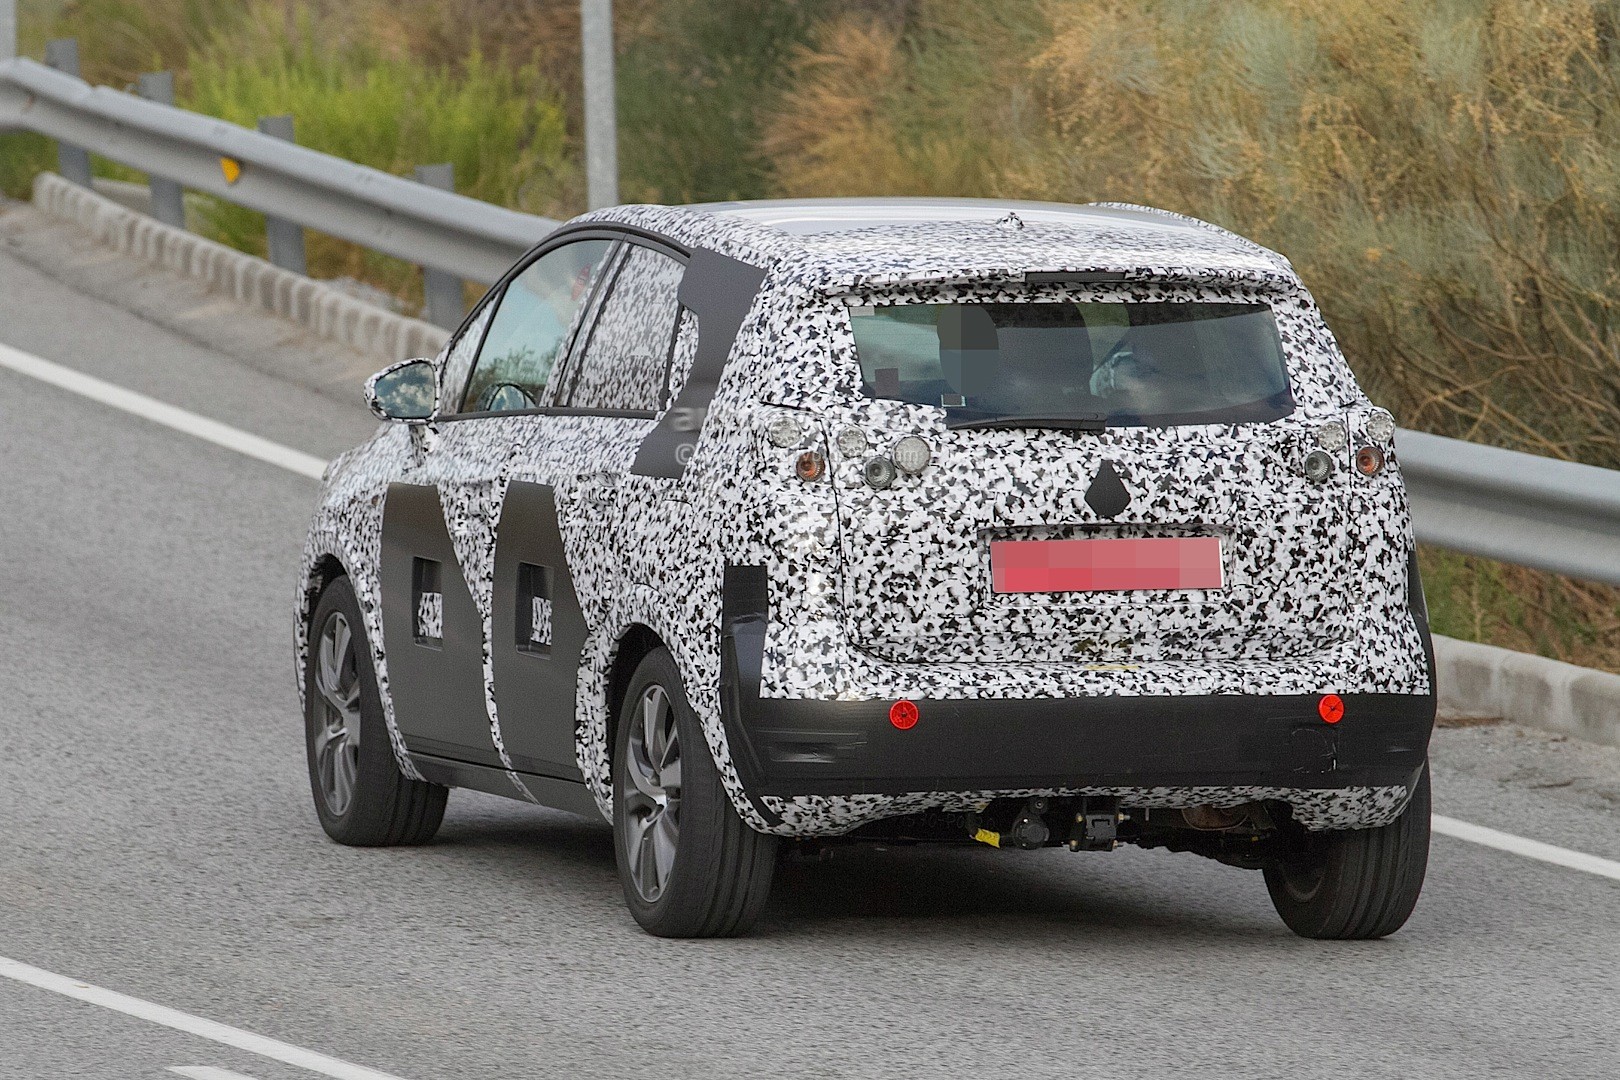 Spyshots: All-New Opel Meriva Reveals Crossover Look and Peugeot